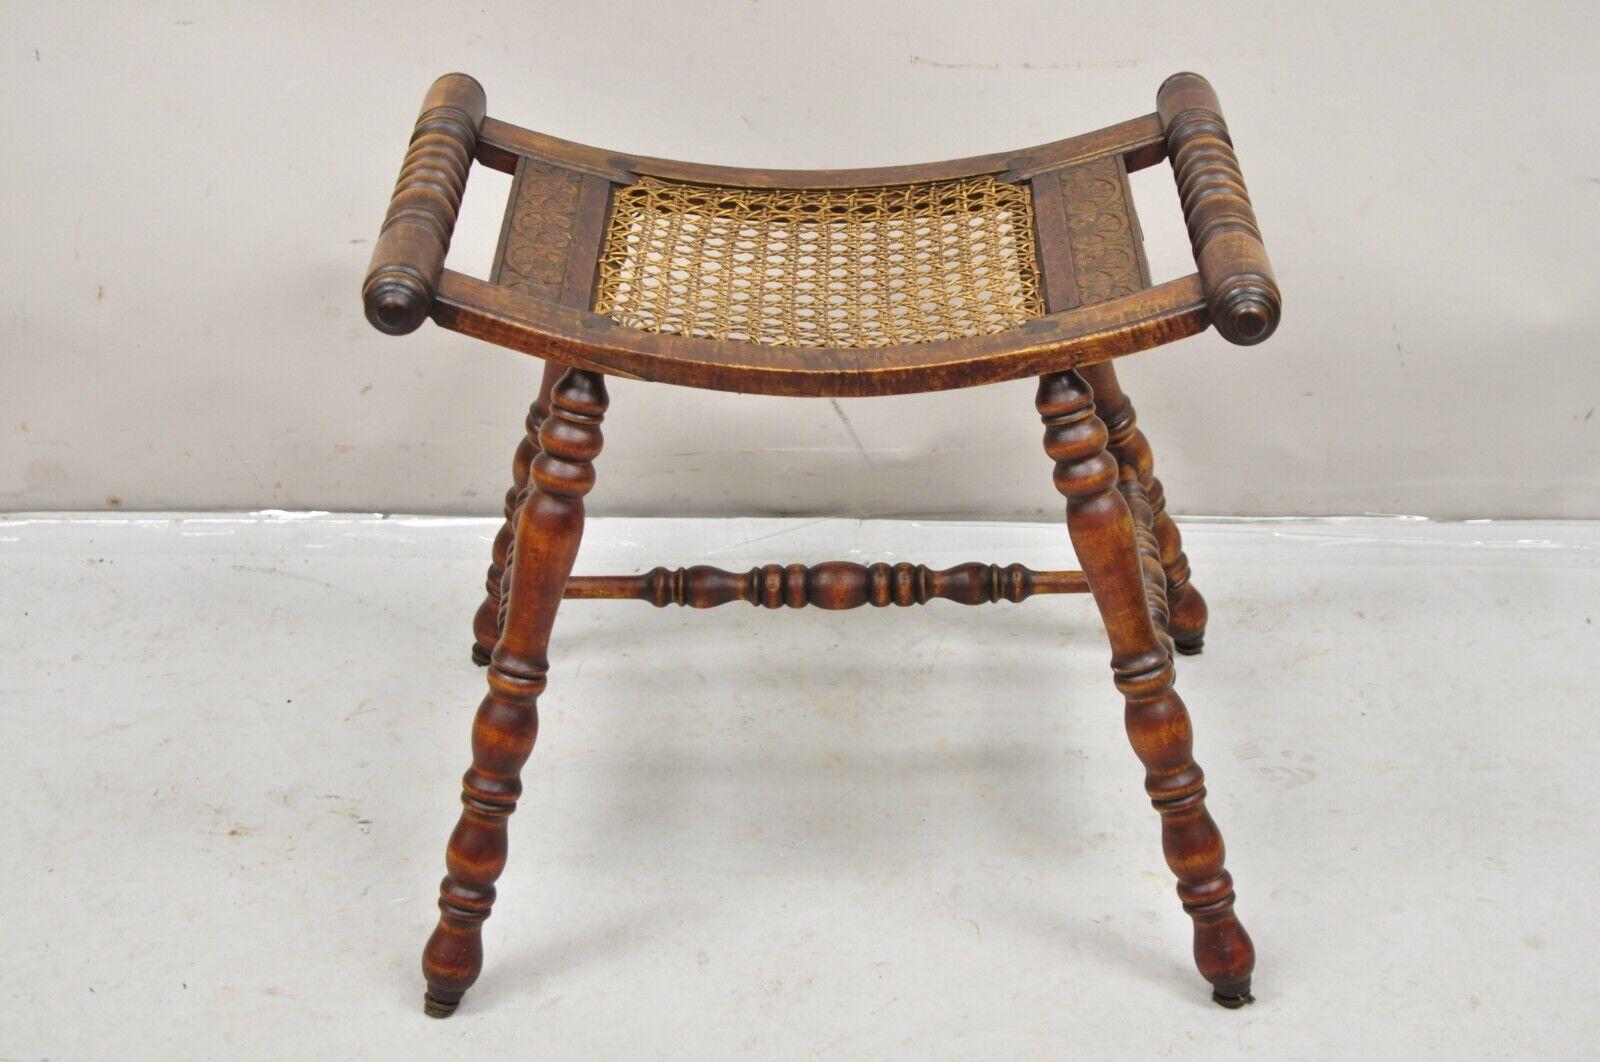 Antique English Jacobean Turn Carved Walnut Cane Seat Spindle Stool. Circa 19th Century. Measurements: 18.5